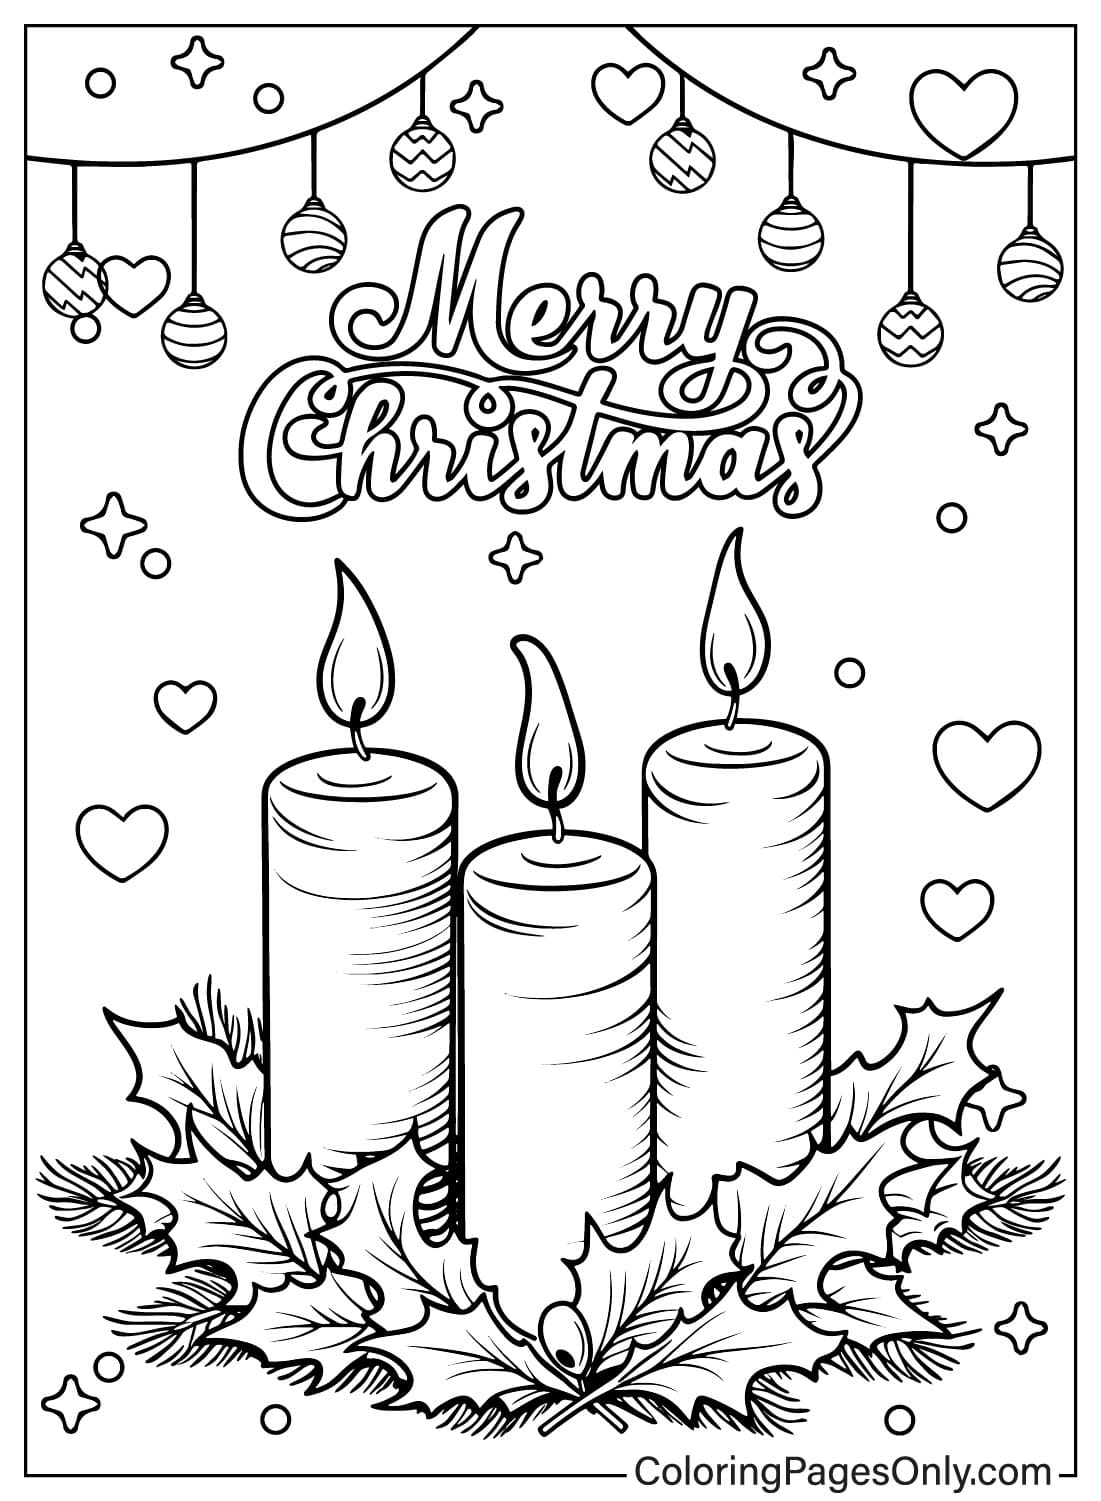 22 Christmas Candles Coloring Pages - ColoringPagesOnly.com